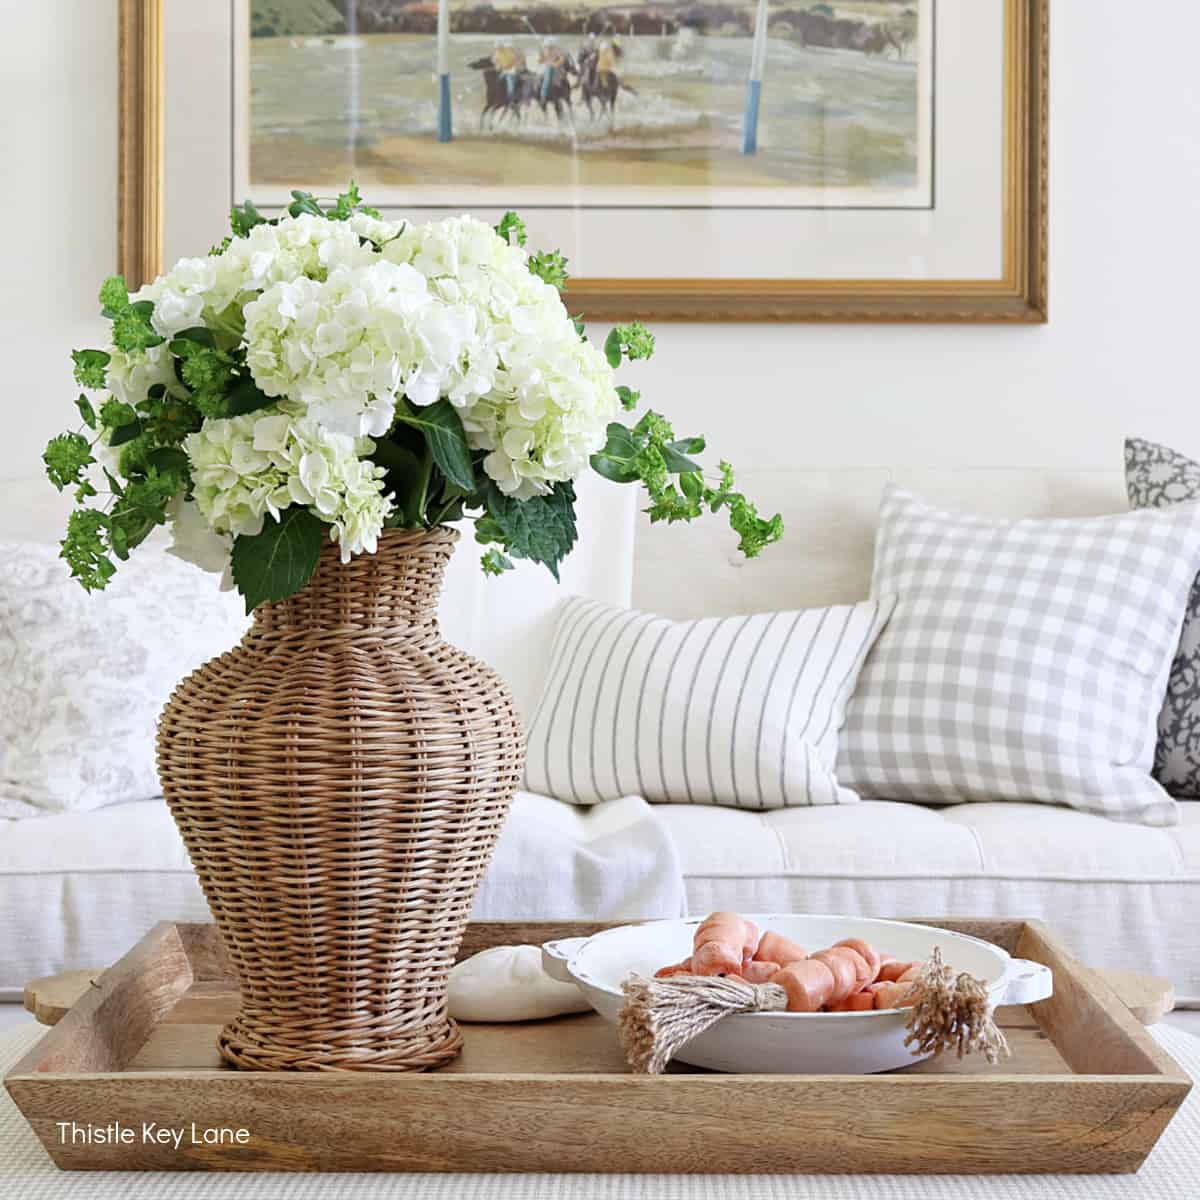 Beach-Inspired Summer Tablescape for Indoors or Out - Chalking Up Success!